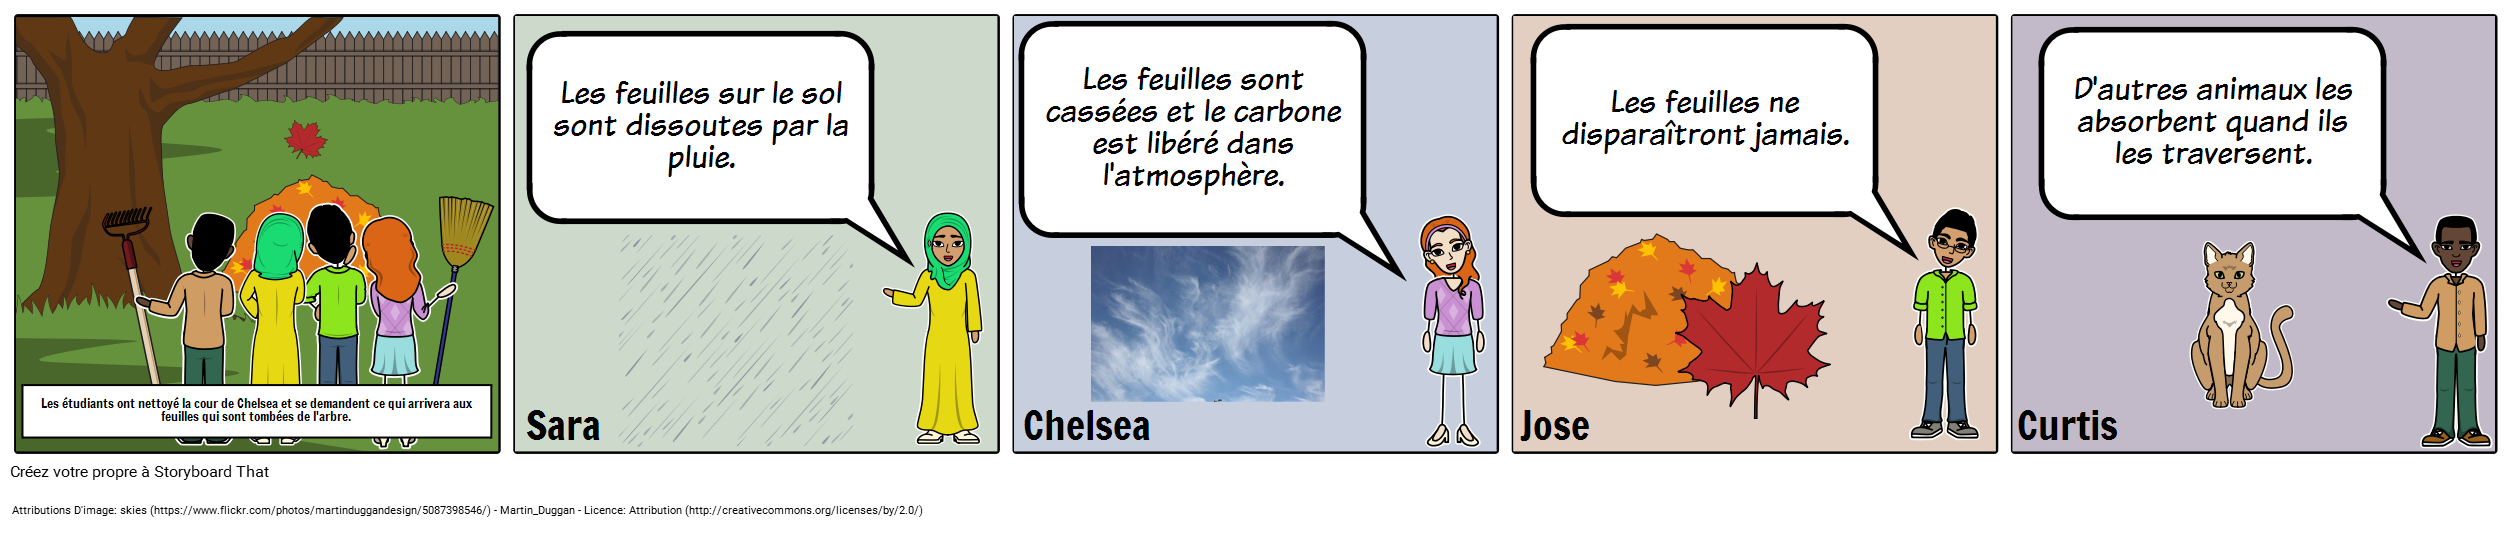 Discussion Storyboard - MS - Le Cycle du Carbone